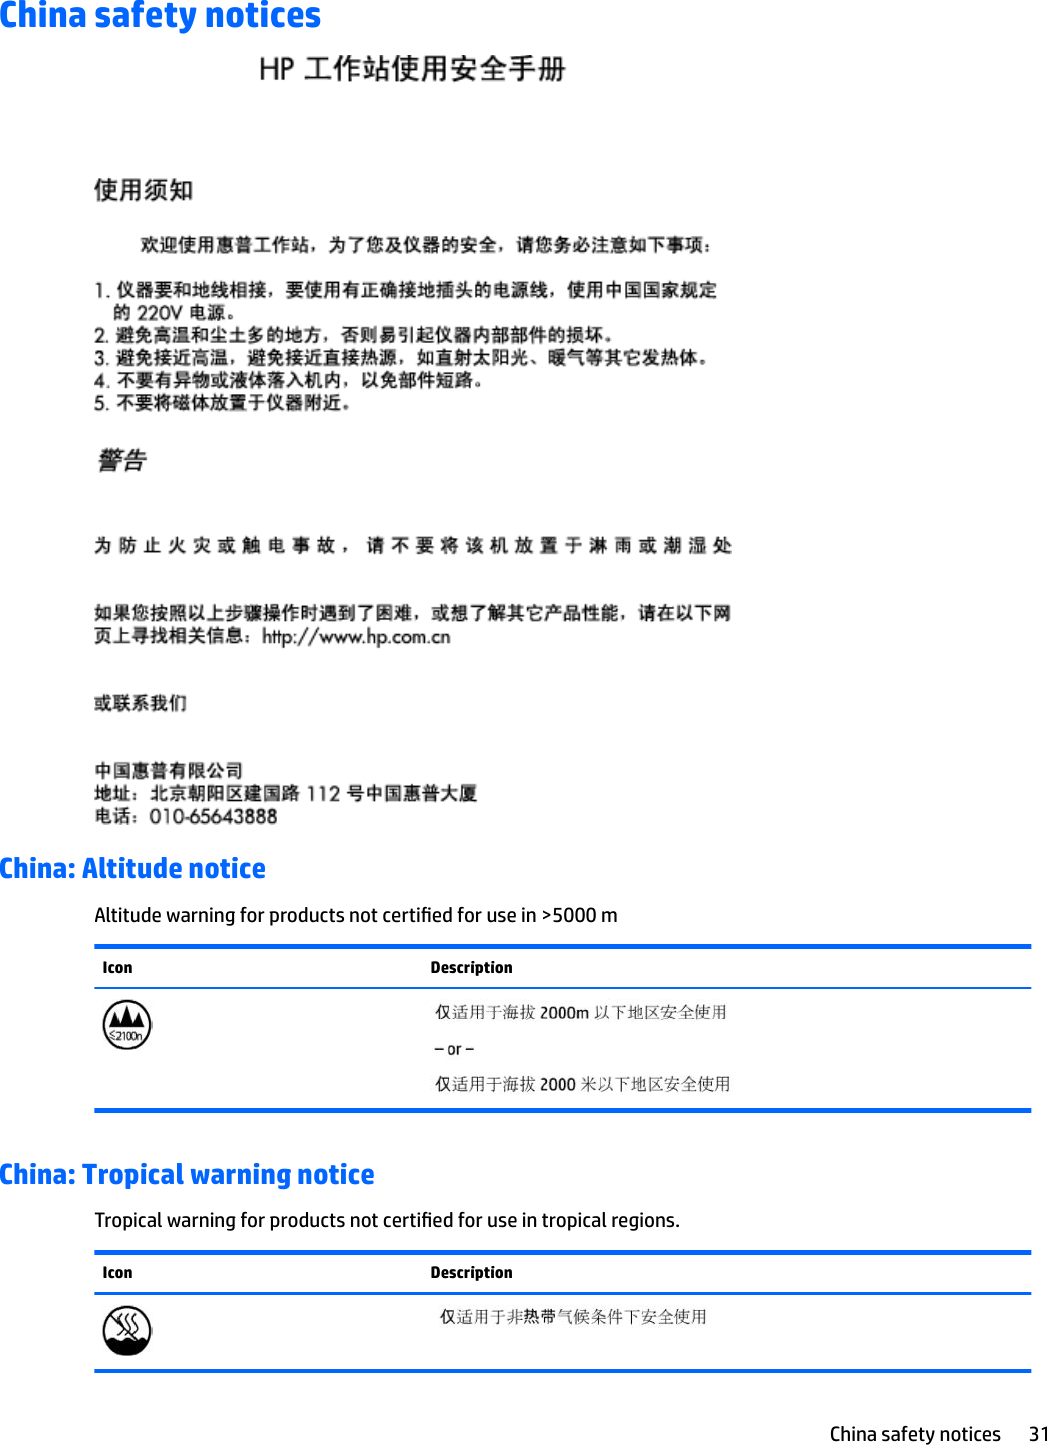 China safety noticesChina: Altitude noticeAltitude warning for products not certied for use in &gt;5000 mIcon DescriptionChina: Tropical warning noticeTropical warning for products not certied for use in tropical regions.Icon DescriptionChina safety notices 31